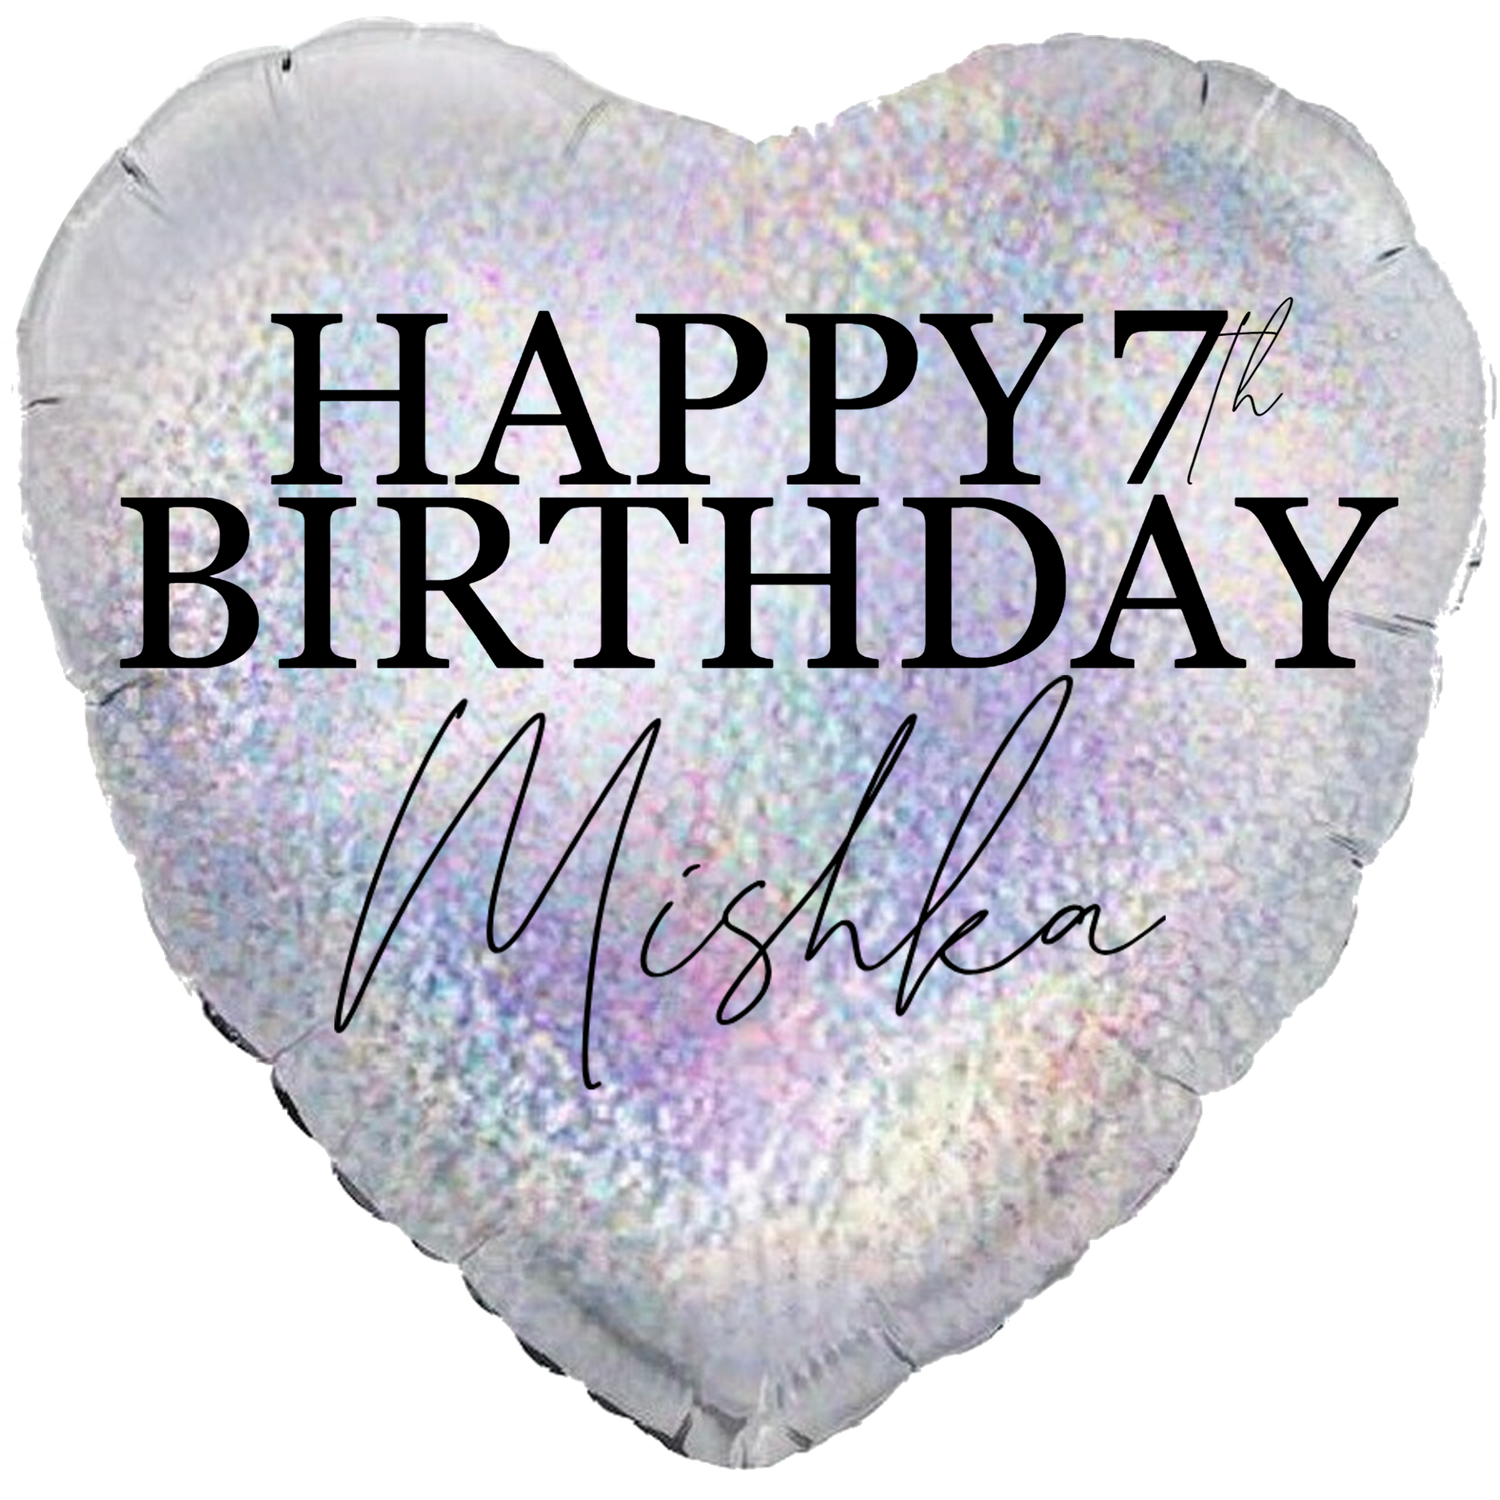 Personalized/Customized Custom Name/Text & Age Holographic Silver Heart Foil/Mylar Balloons For Six Months/First/Second/Third/Sixteenth/Twenty-First/Thirty/Forty/Fifty/Sixty/Seventieth Birthday, Milestone Birthday or a Special Themed Birthday Event. Supports Helium/Air, Luxury Bespoke Balloons Are a Perfect Surprise For Your Baby, Wife, Mom, Dad, Brother, Sister, Friends & Loved Ones